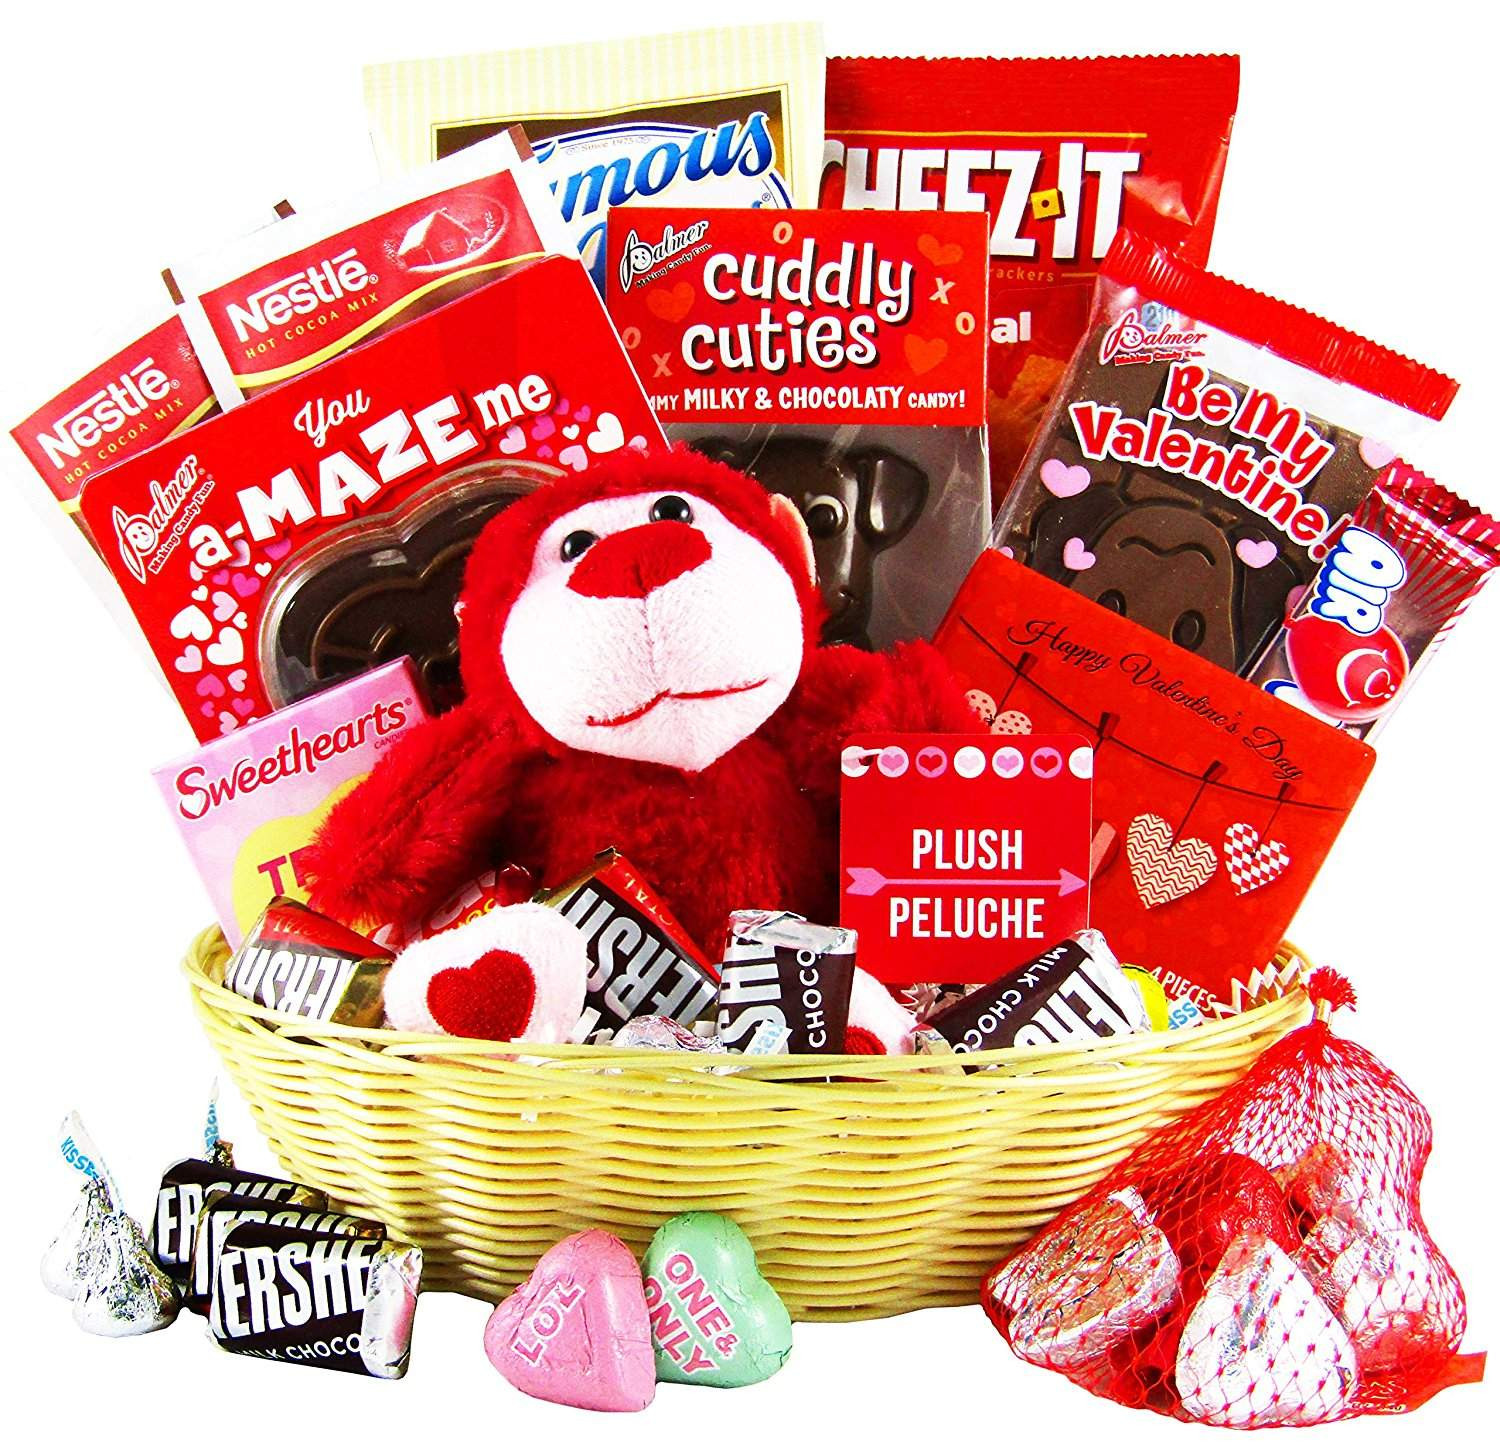 Candy Gift Baskets For Valentines Day
 Top 10 Best Valentine’s Day Candy Gift Ideas